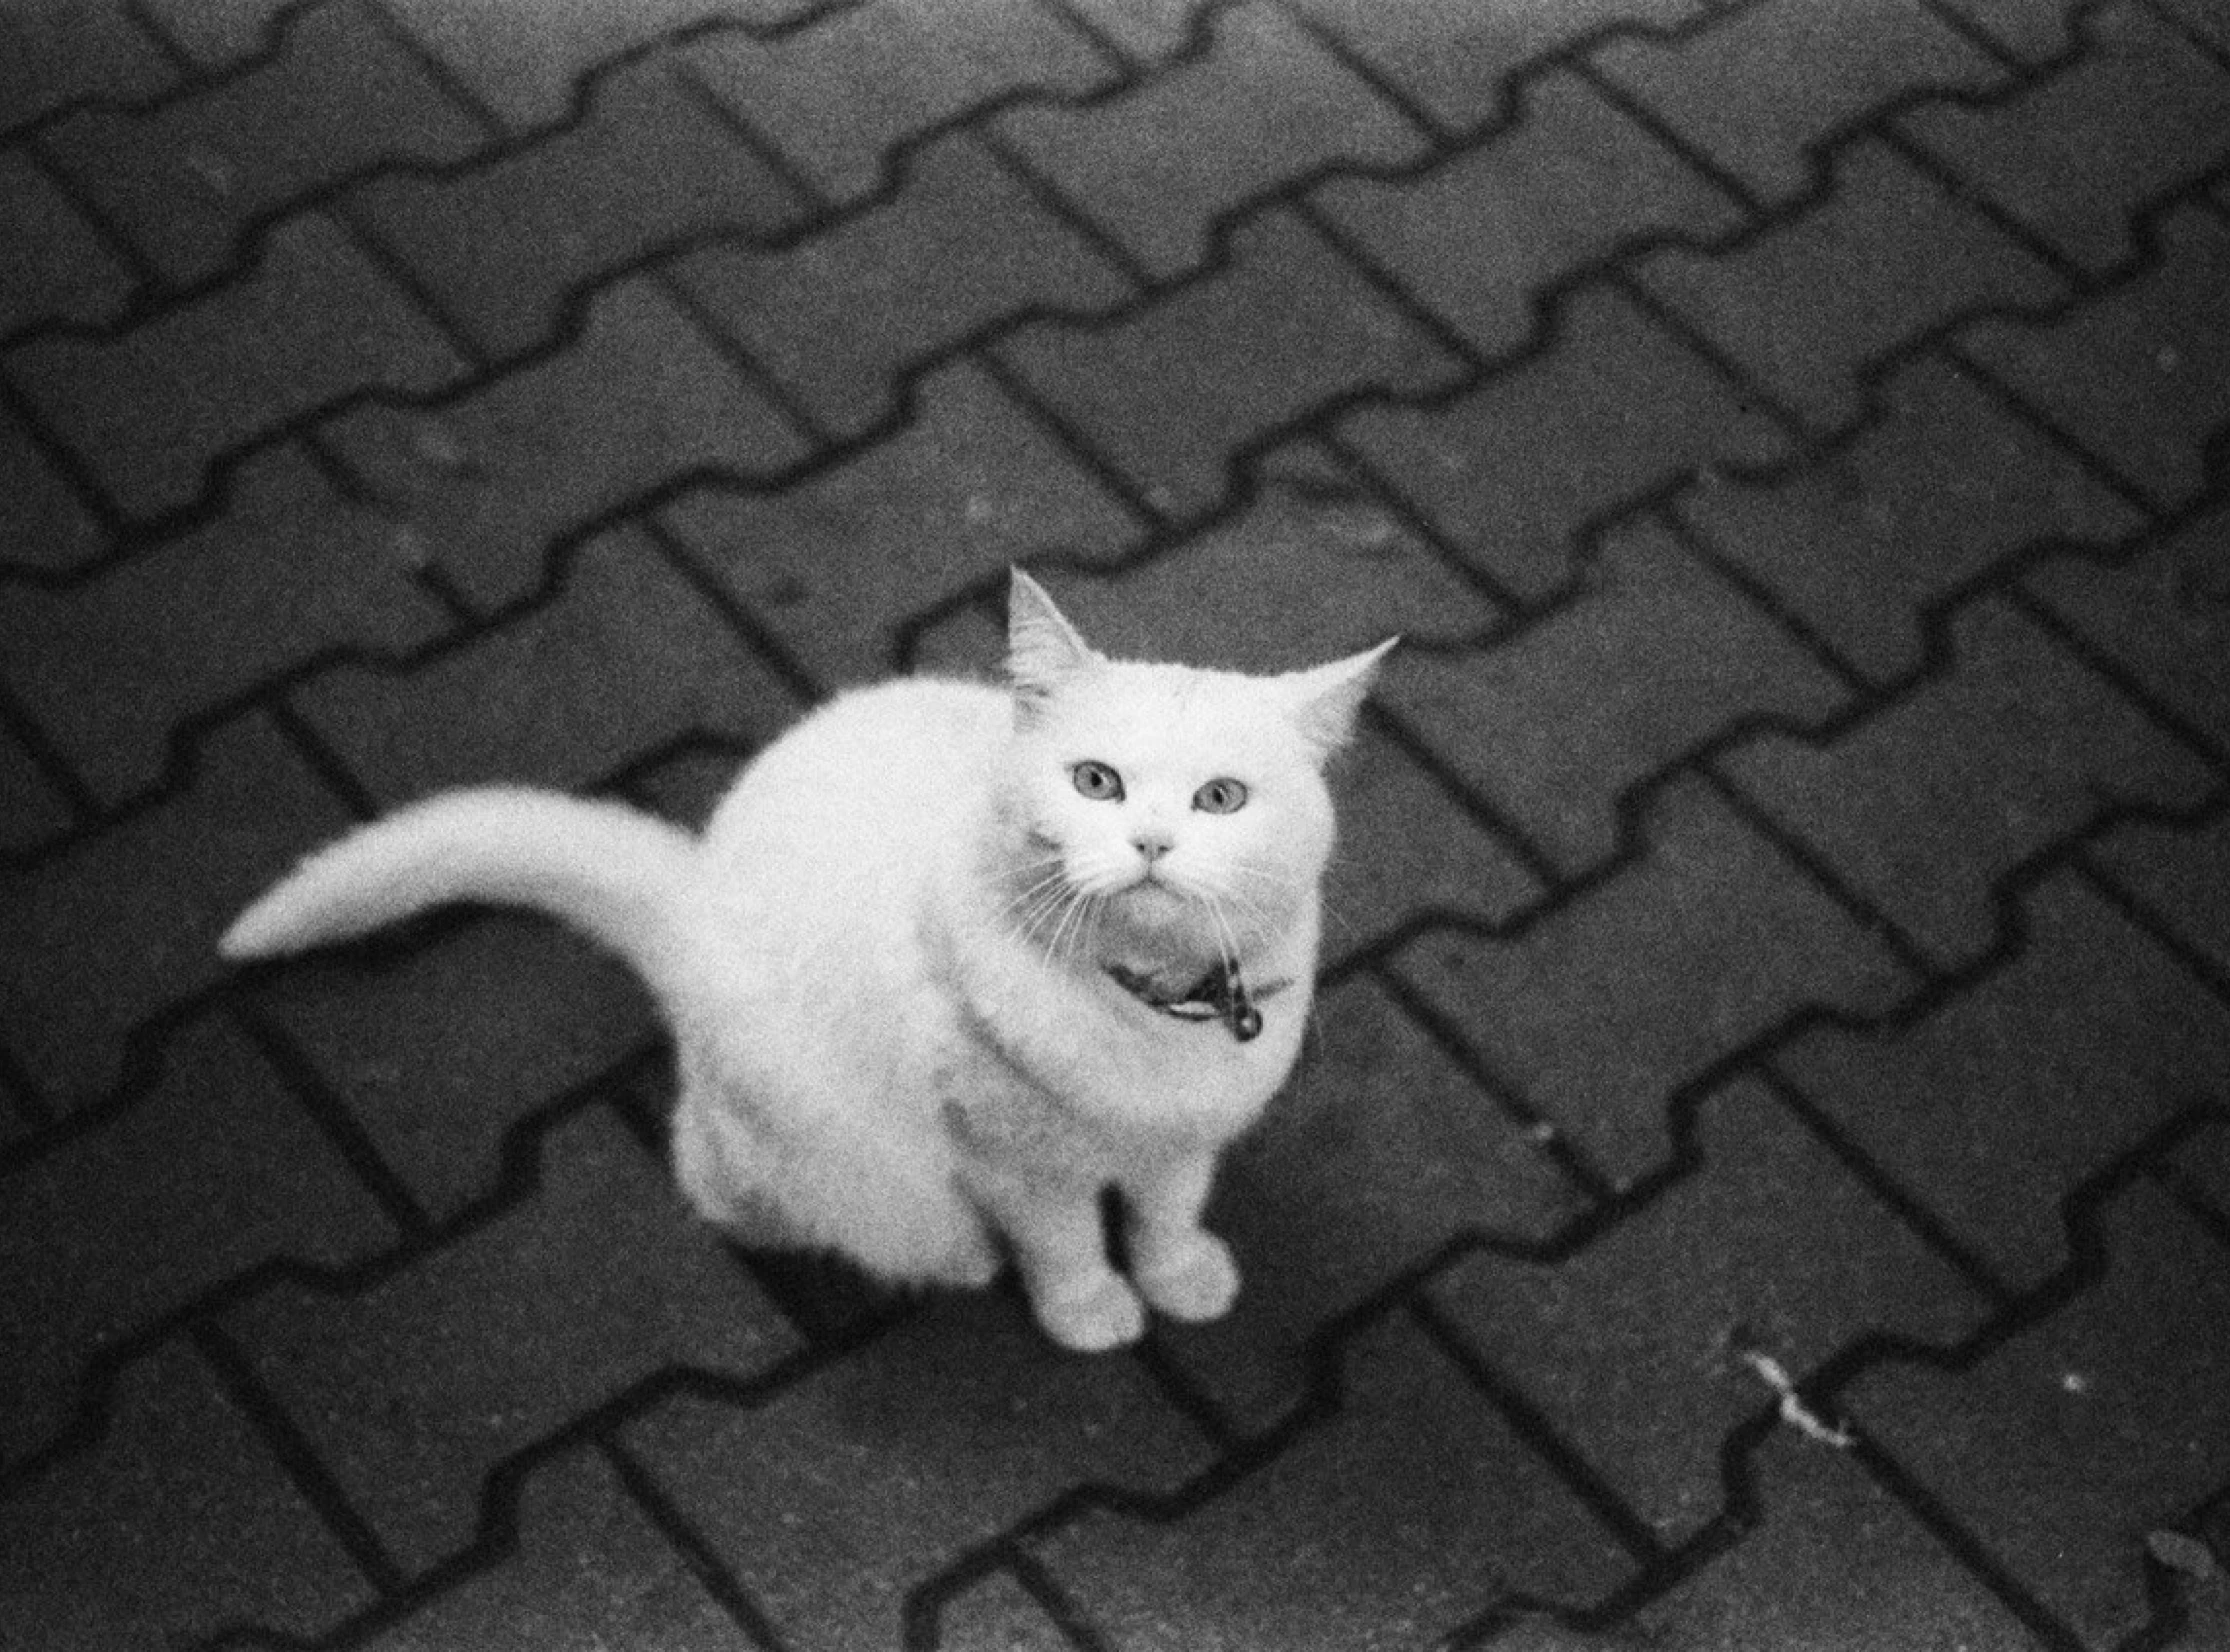 a cat is sitting on the ground with its collar tied